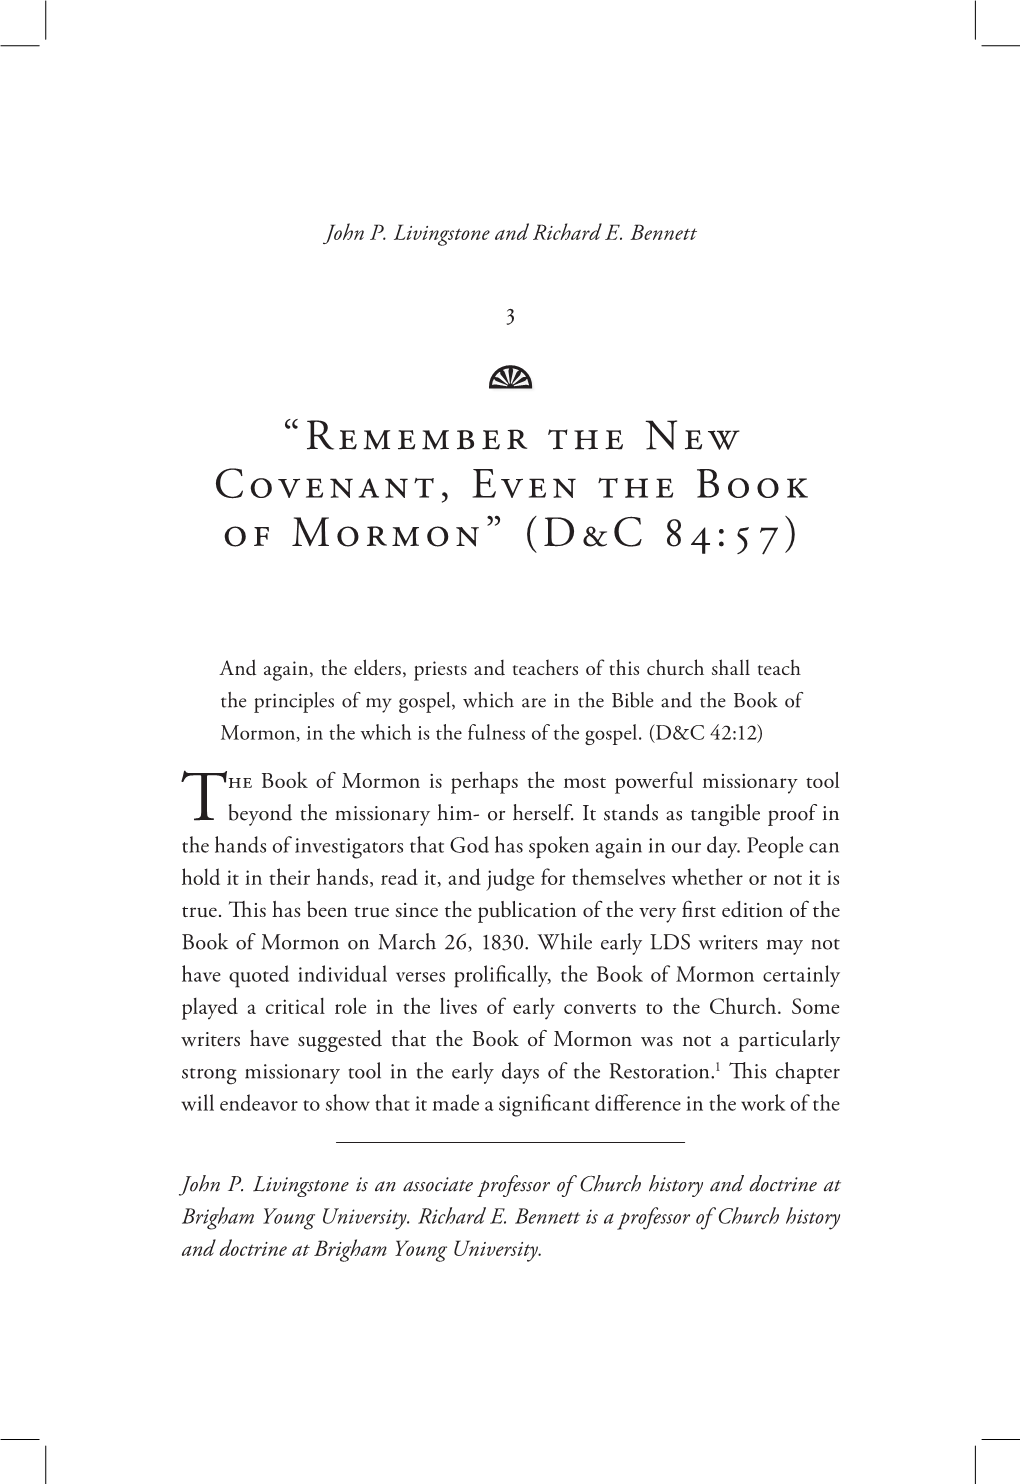 “Remember the New Covenant, Even the Book of Mormon” (D&C 84:57)